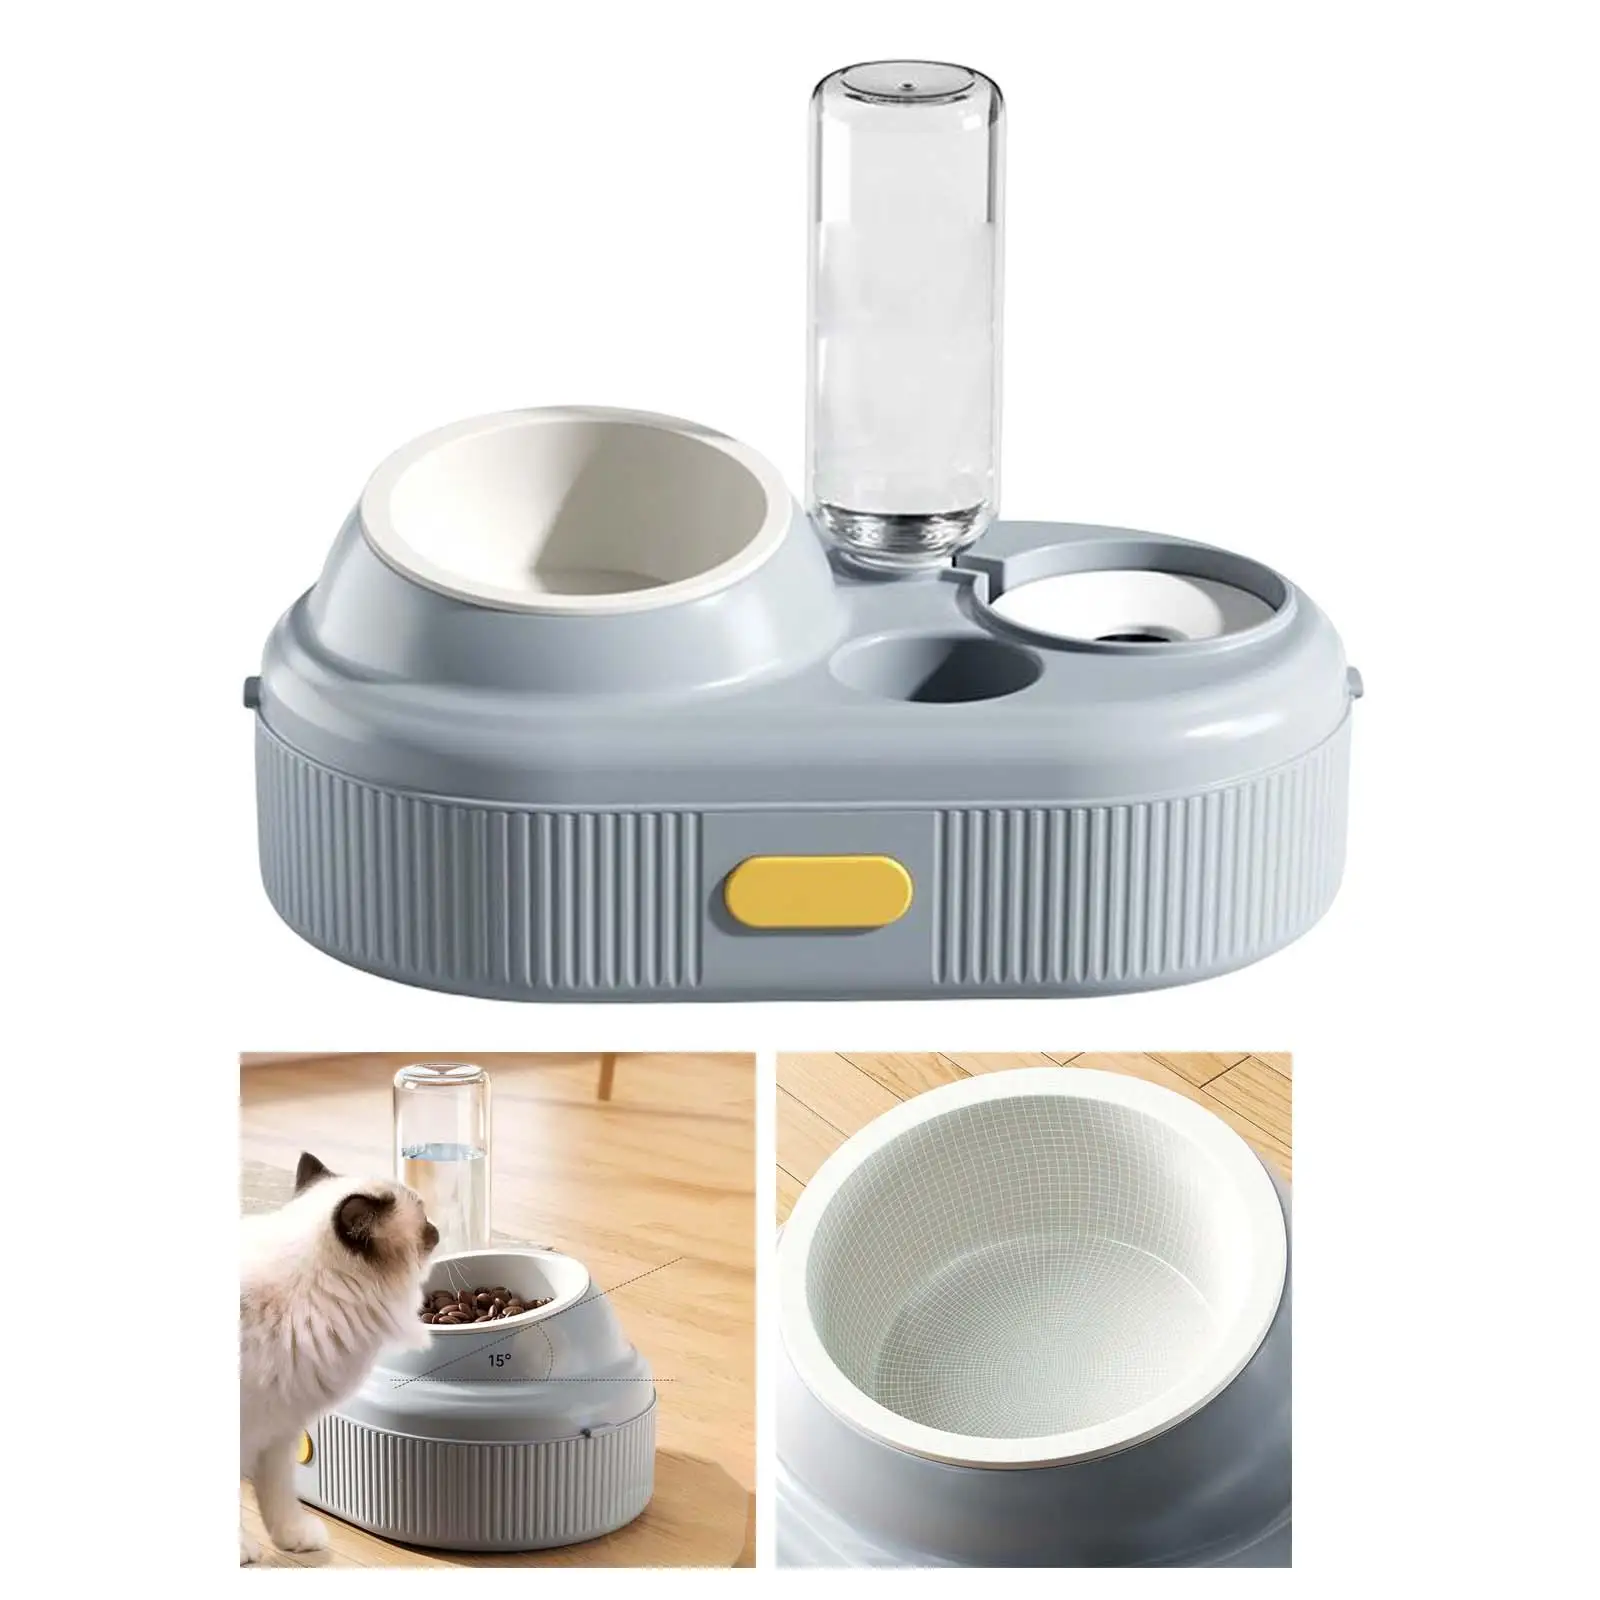 Tilted Cat Bowl Set with Automatic Water Dispenser Pet Feeder for Small Dogs